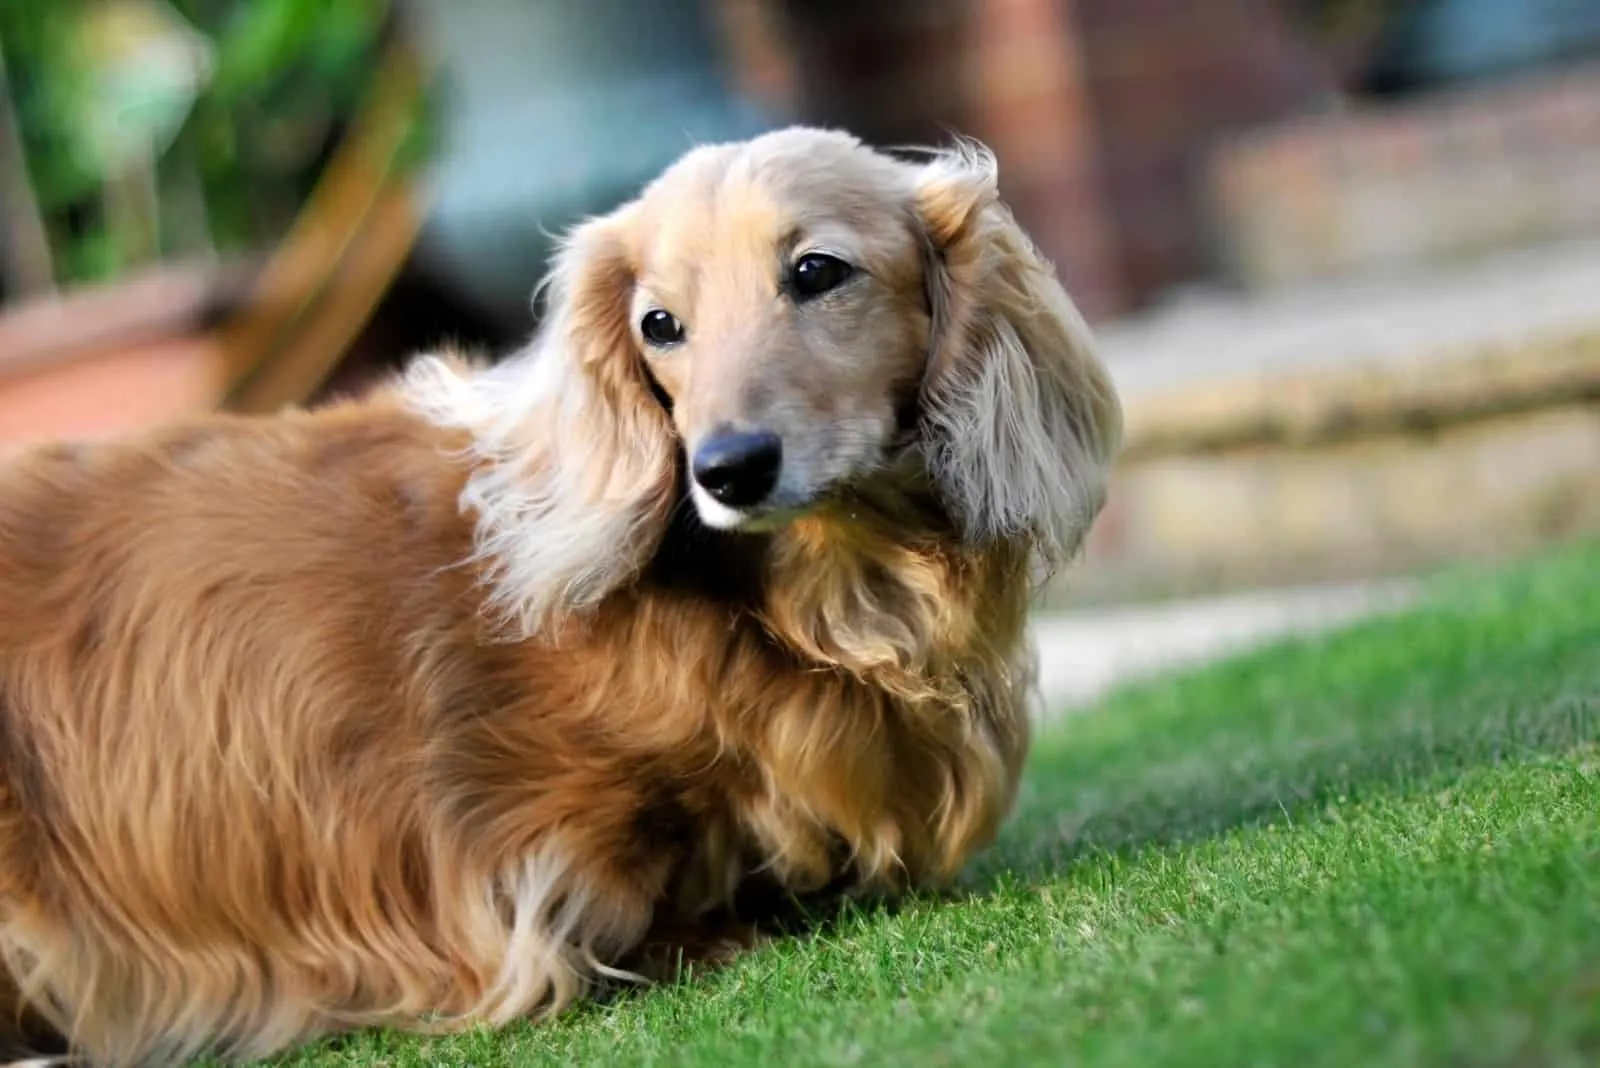 dachshund dog breed standing in the lawn